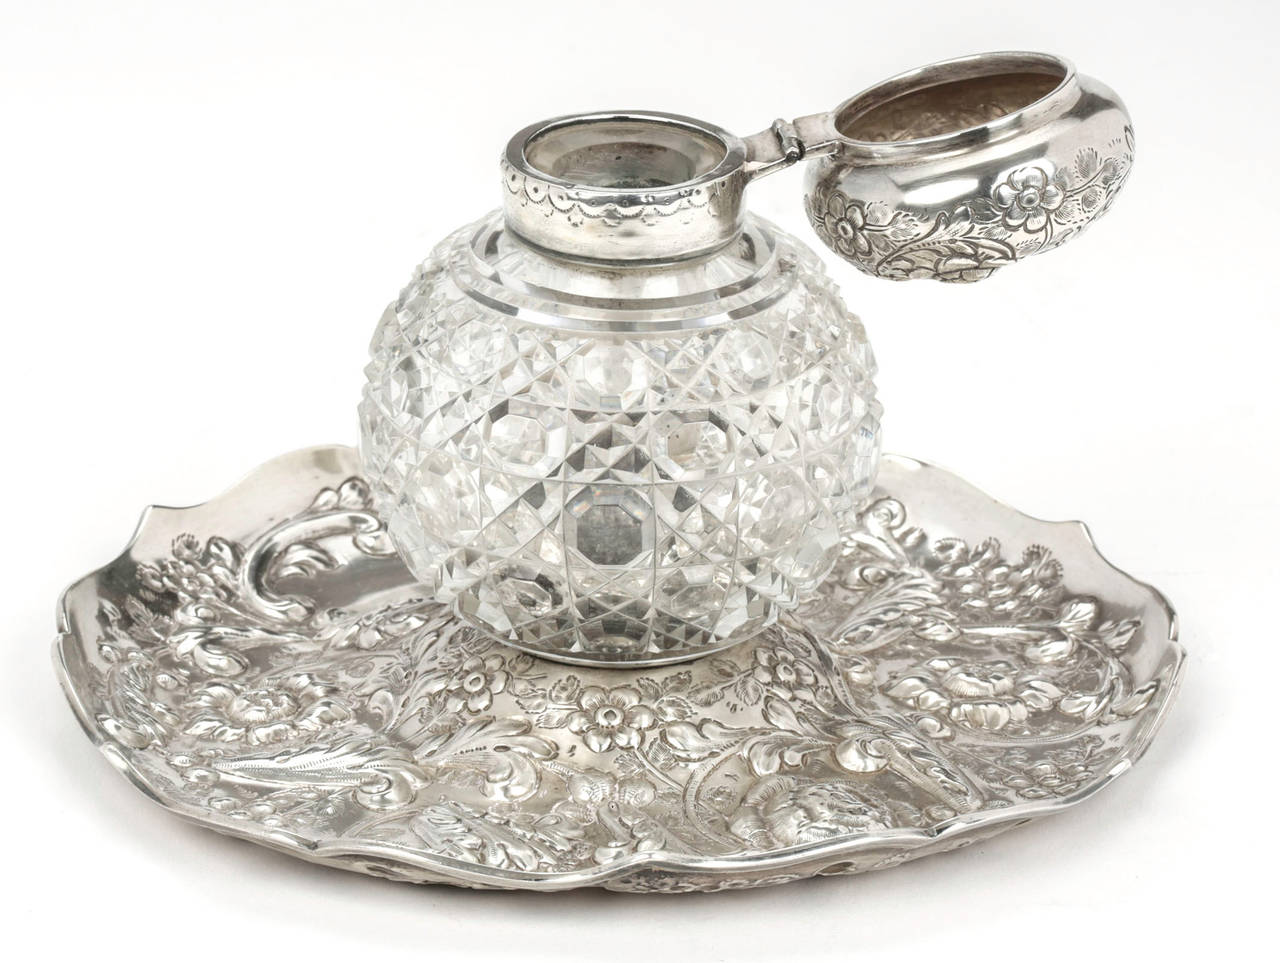 Beautiful English Hall marked sterling and cut crystal ink well.
Cut crystal bottle with sterling lid sits on a exquisitely chased round silver base.
The ink well in the center is not movable.